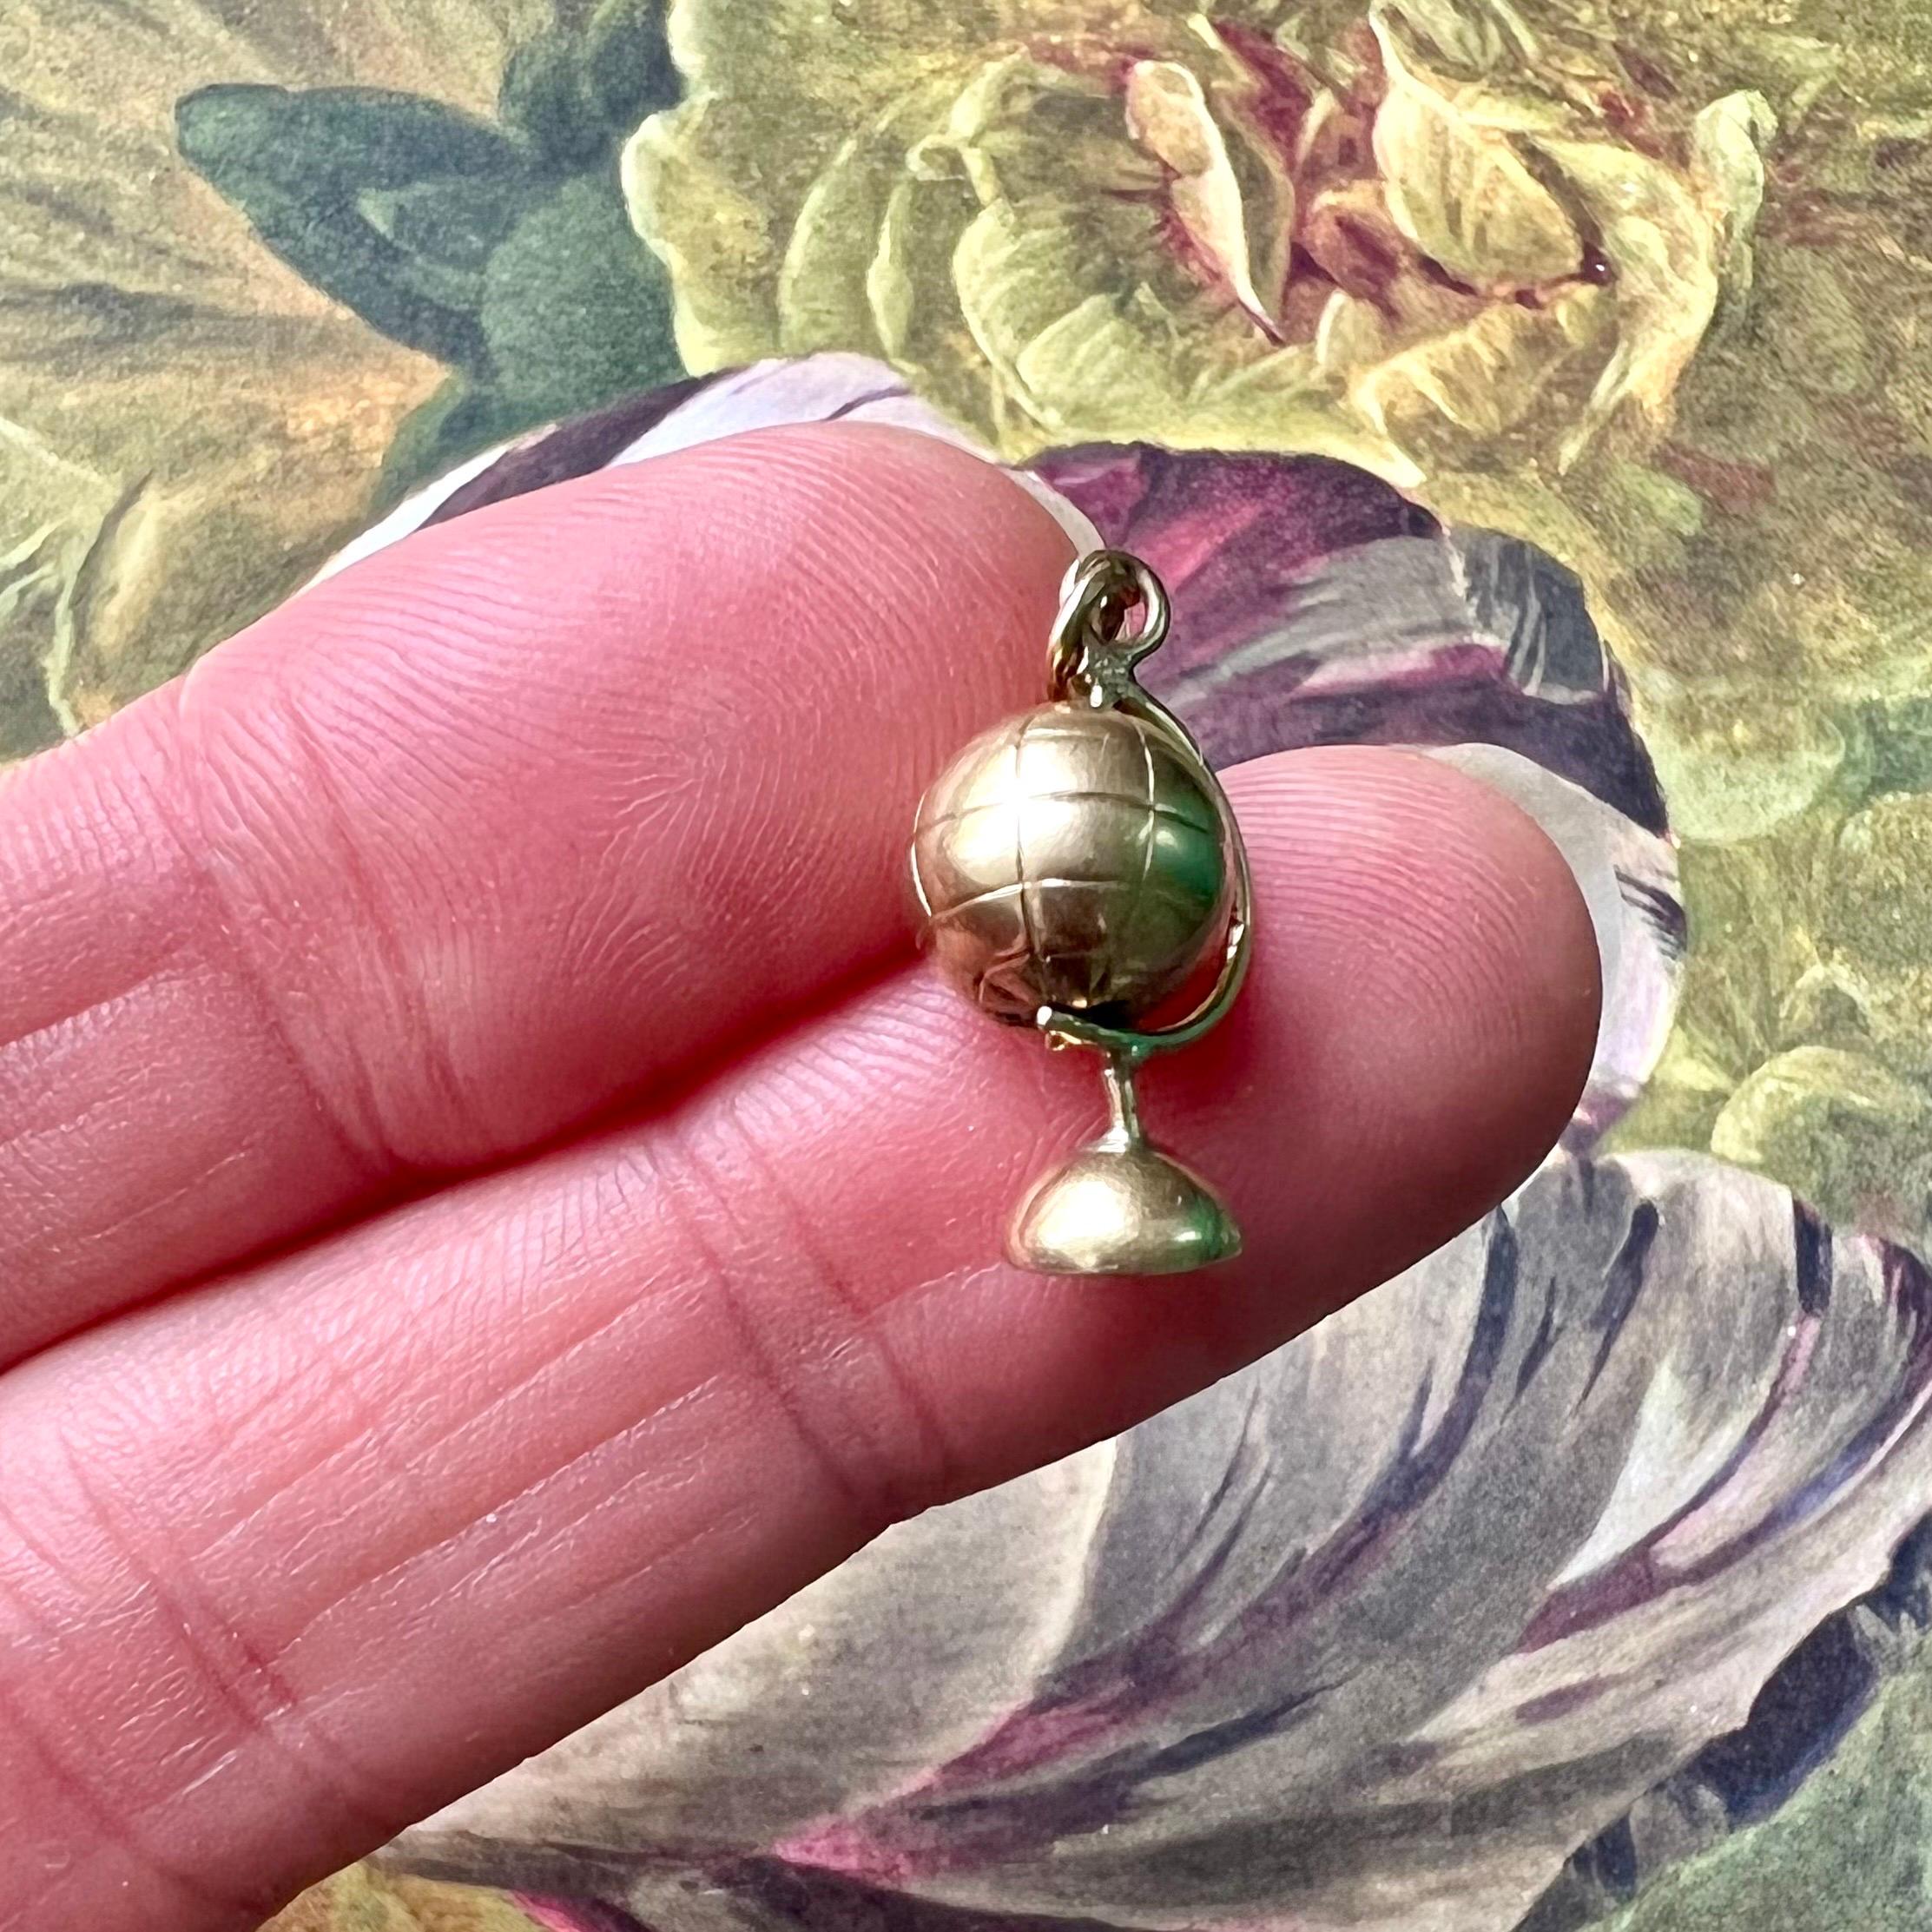 A vintage mid-century gold movable globe on a stand charm pendant. The globe can spin around, is beautifully designed and made in 14 karat gold. Charms are great to collect as wearable memories, it has a symbolic and often a sentimental value. They